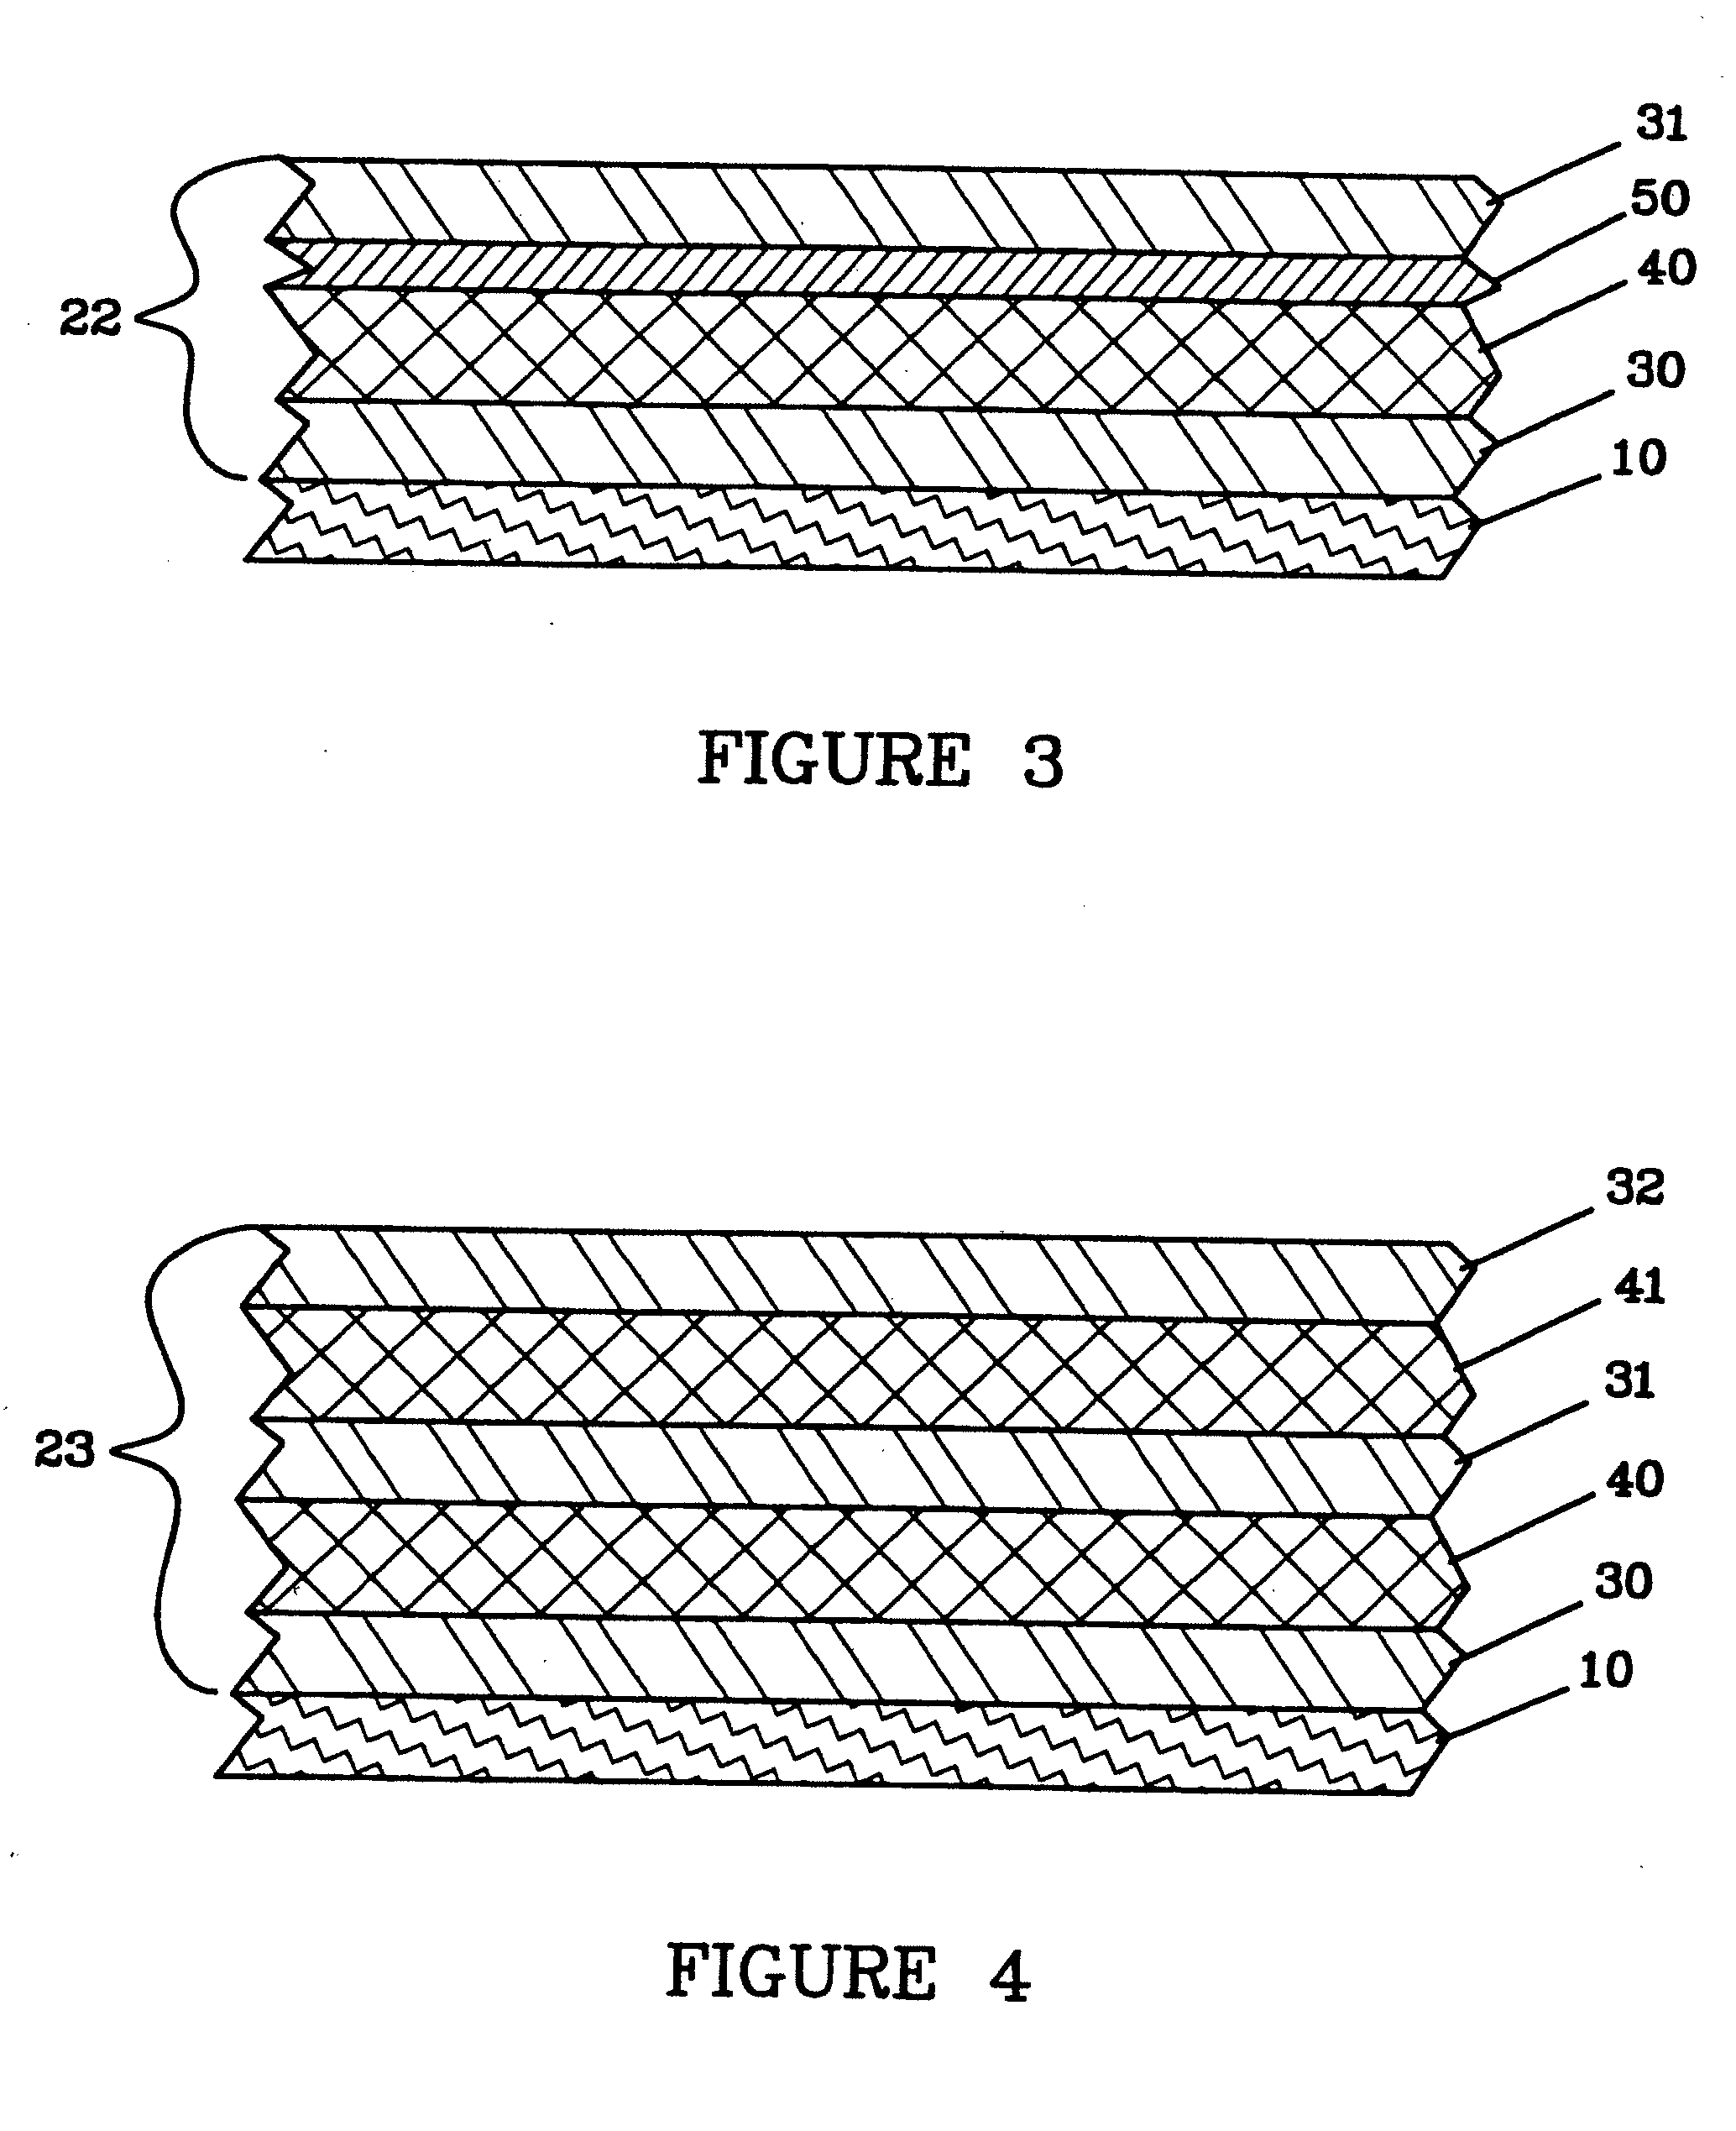 Lithium anodes for electrochemical cells